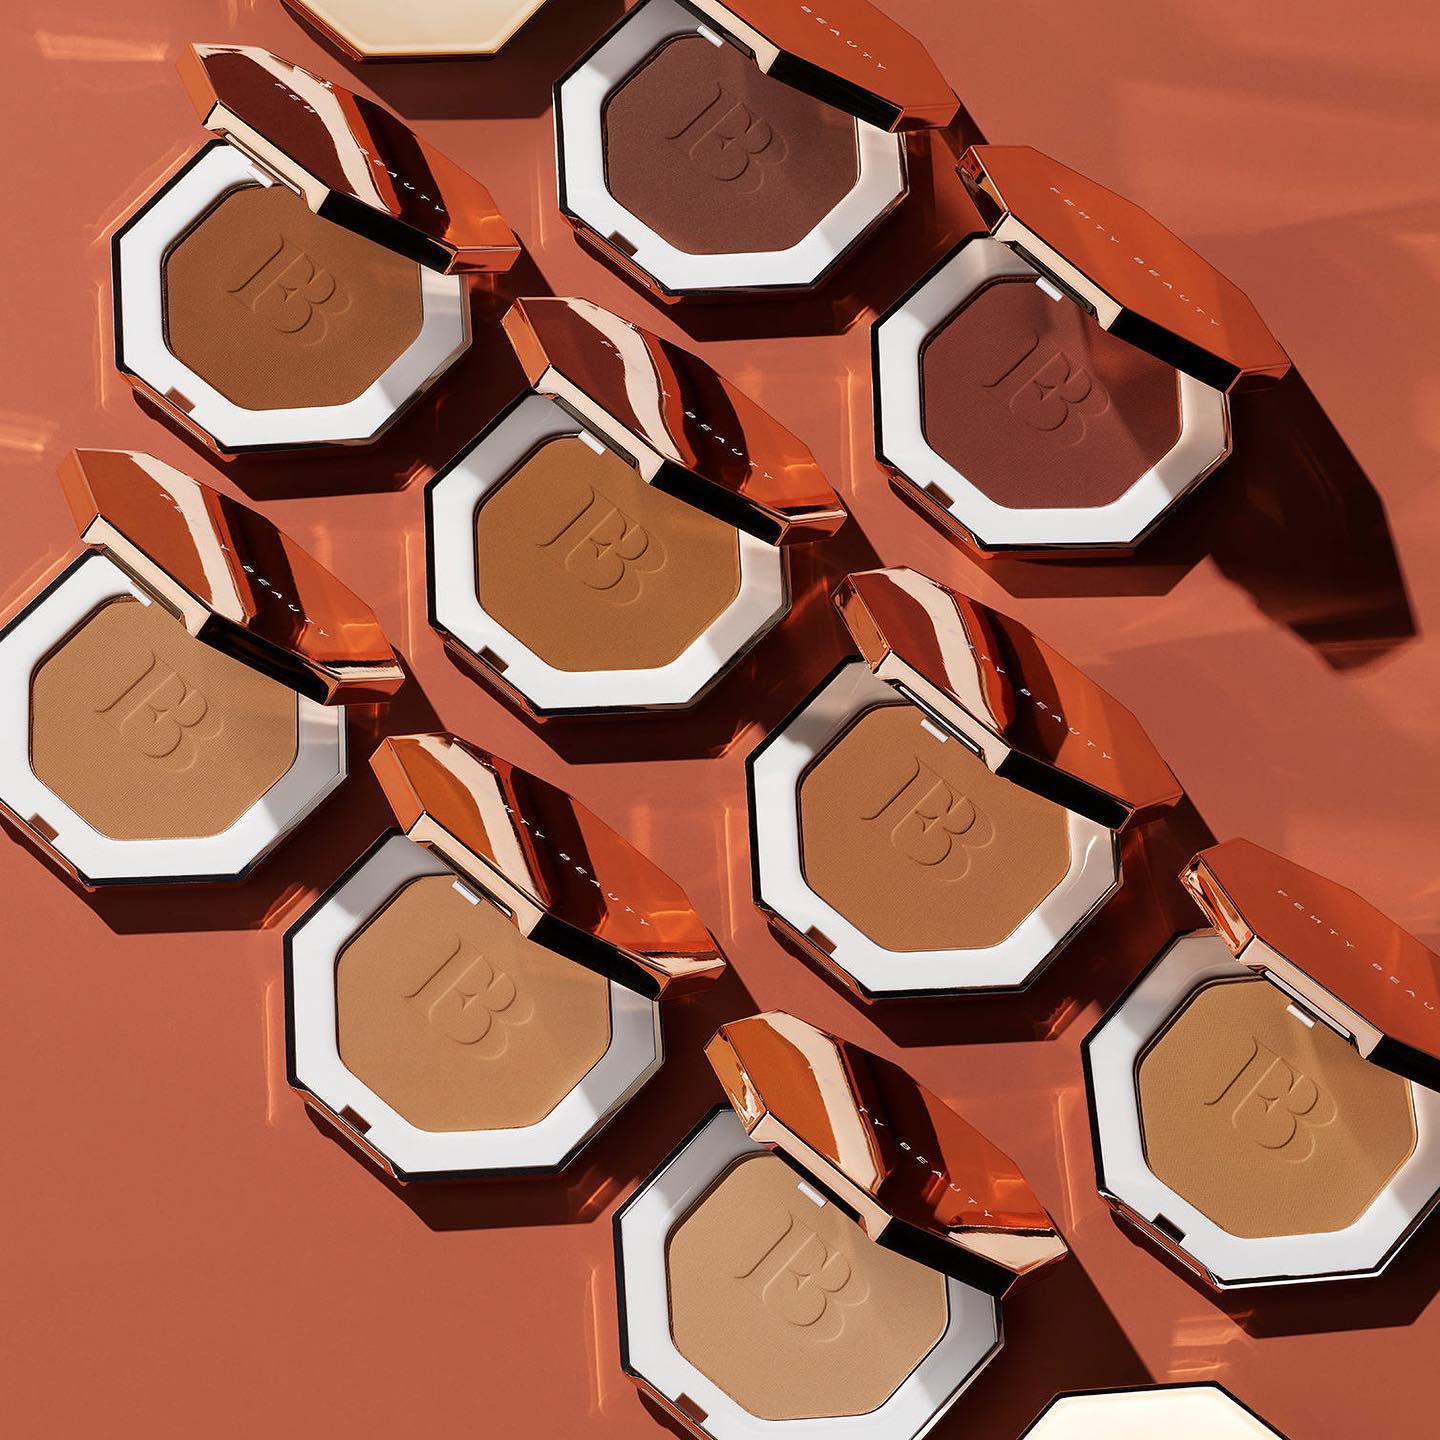 On a rusty orange beackground, various skin shades of Fenty Beauty bronzer are showcased.